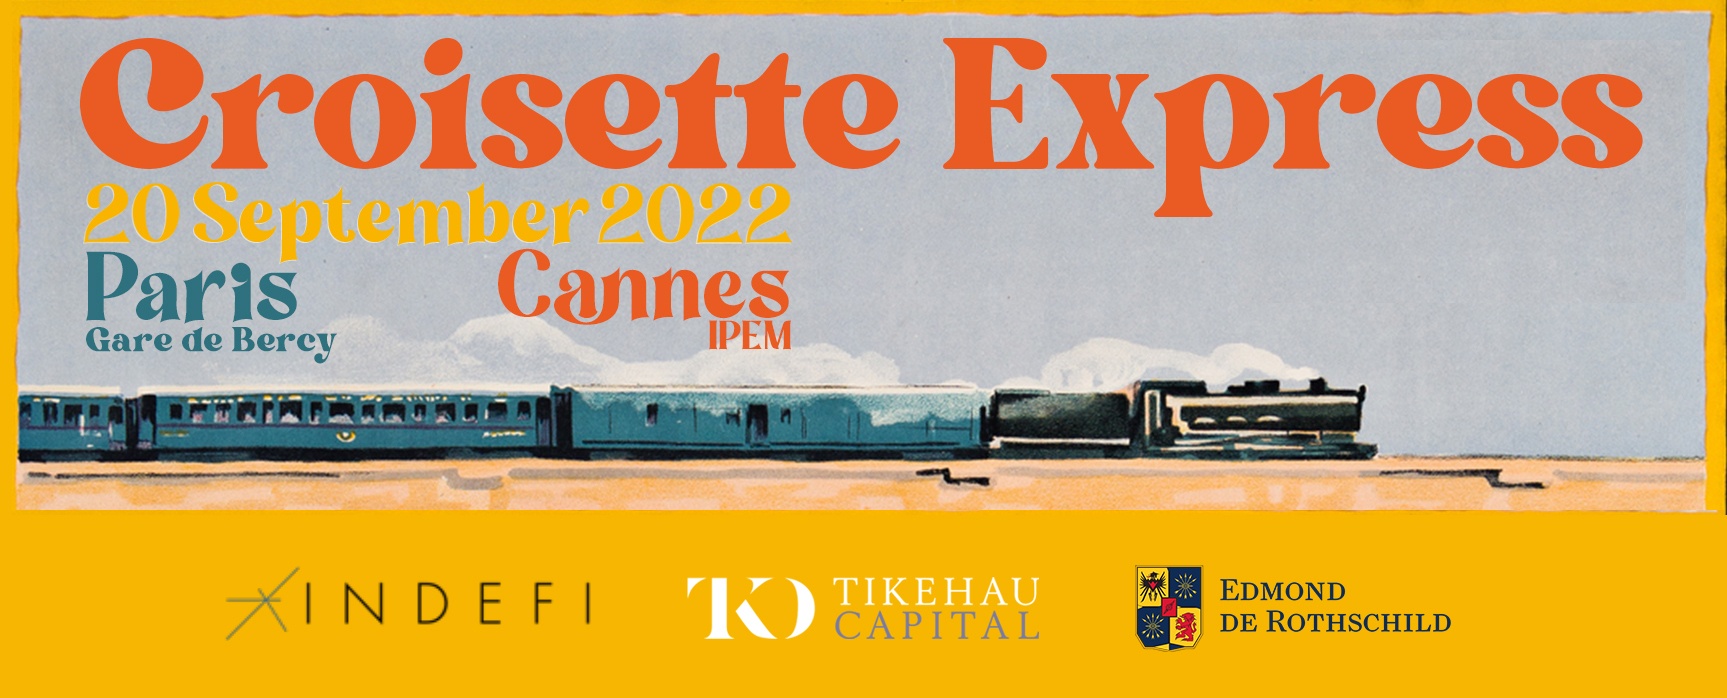 More information about the Croisette Express !